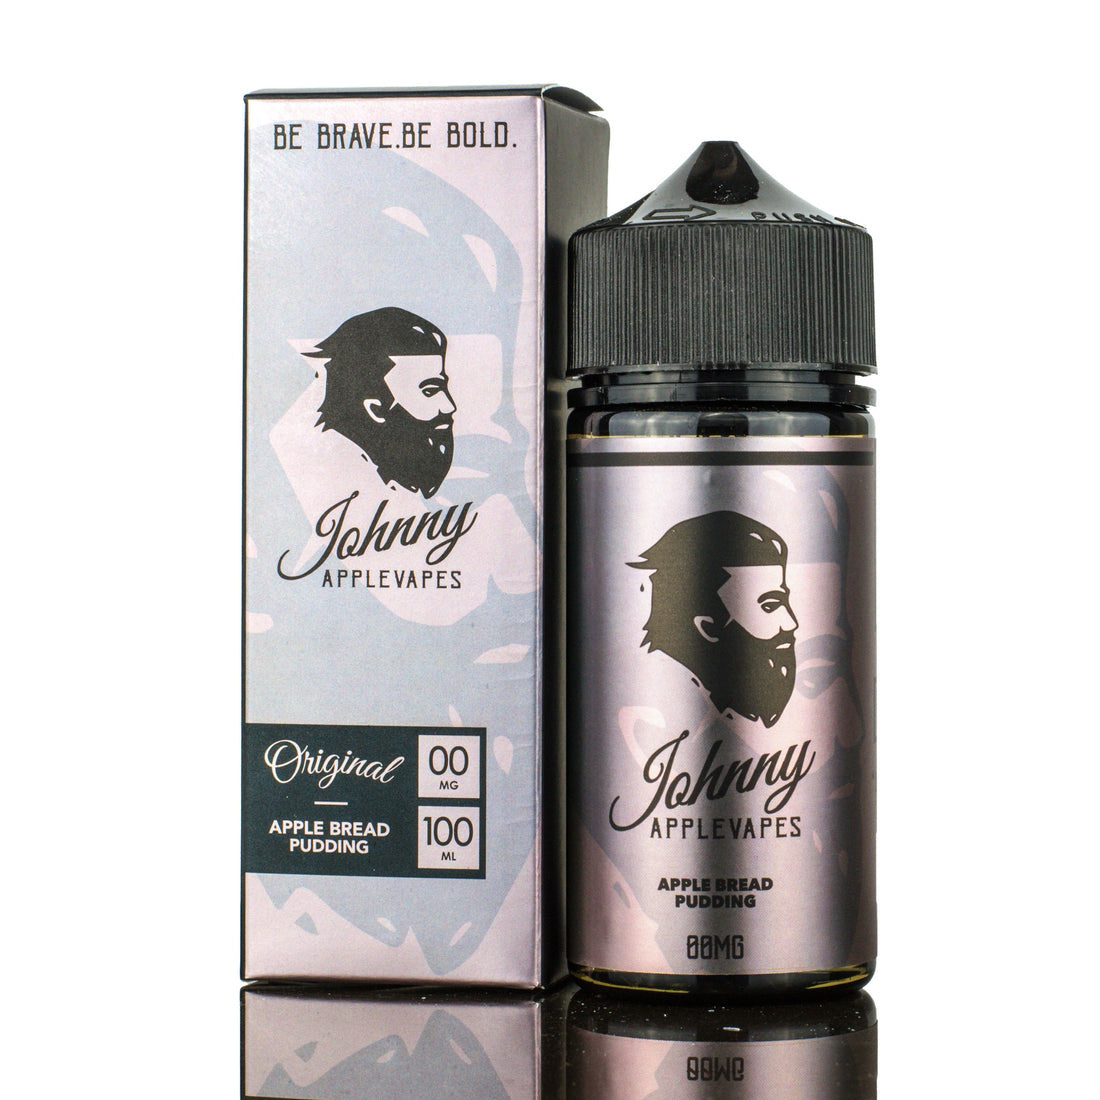 Johnny Applevapes: Apple Bread Pudding